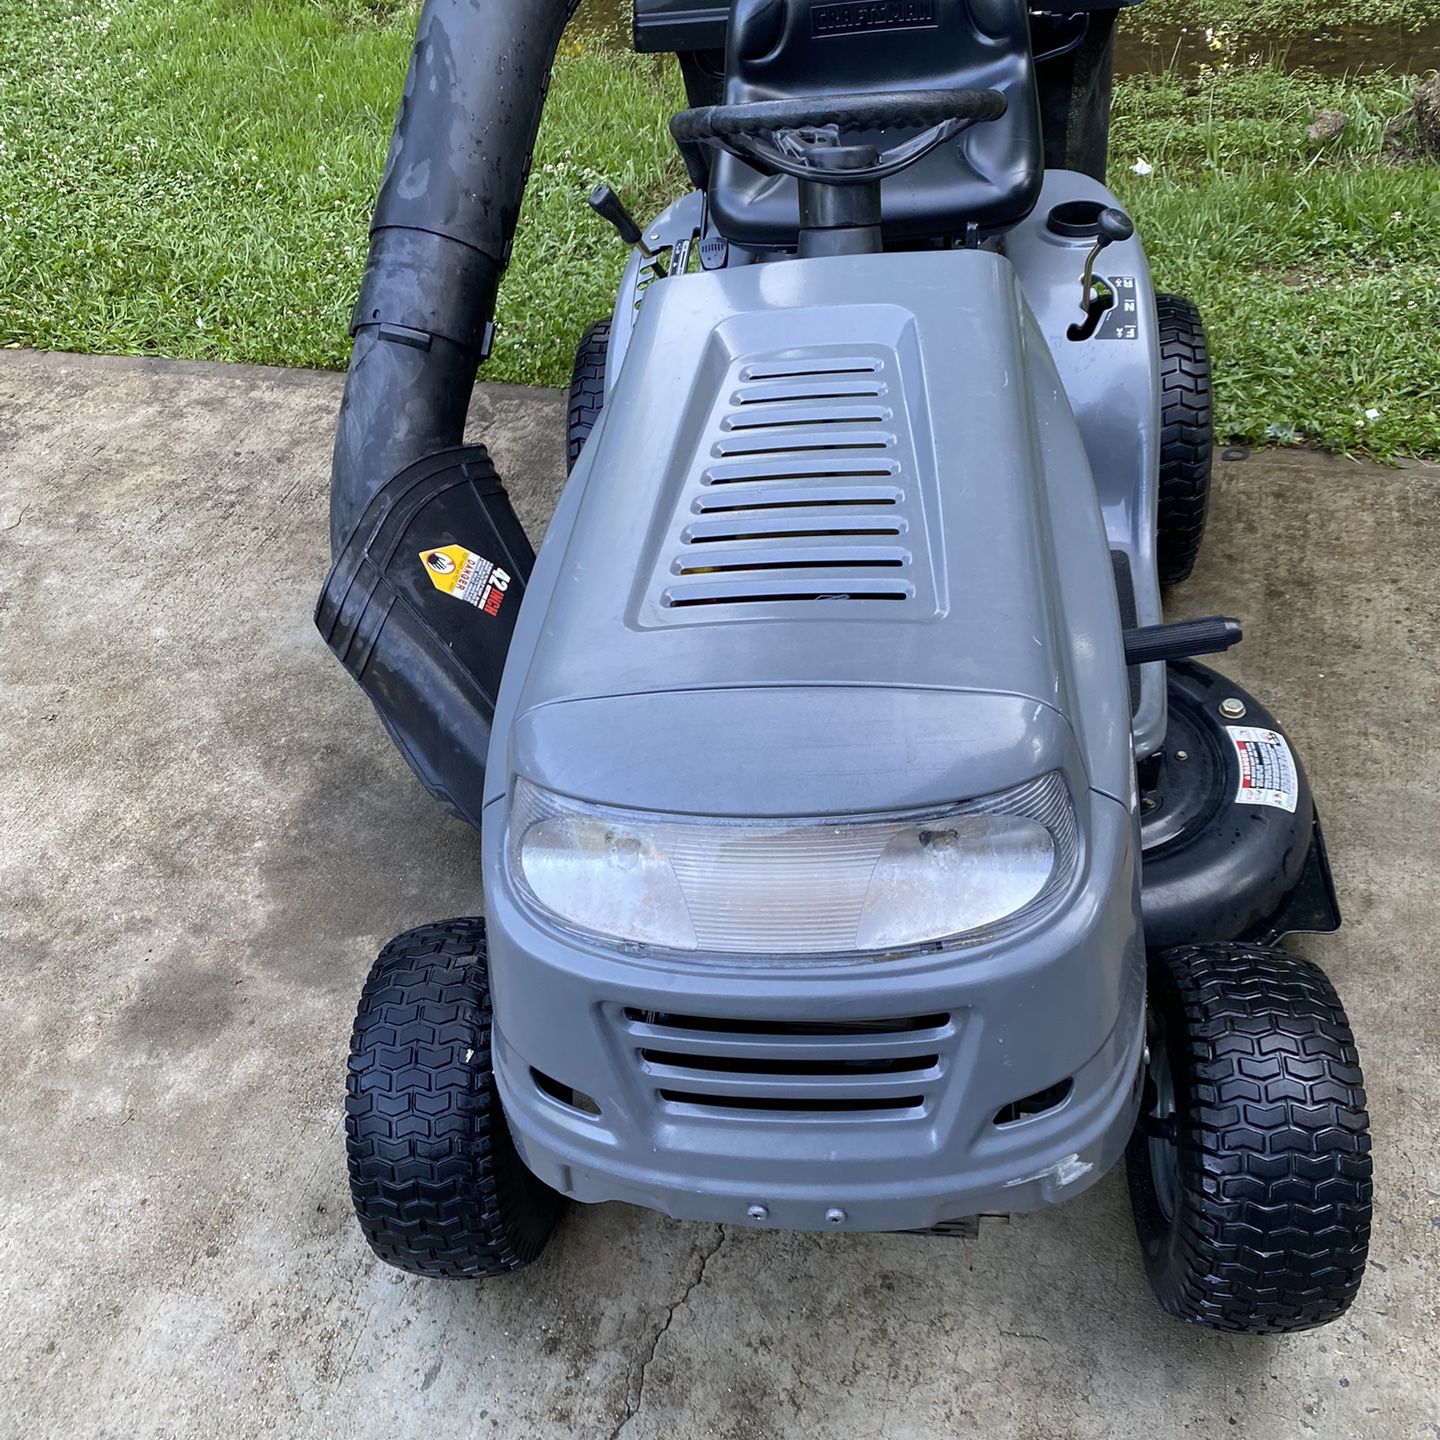 Craftsman Riding Mower With Bagger 